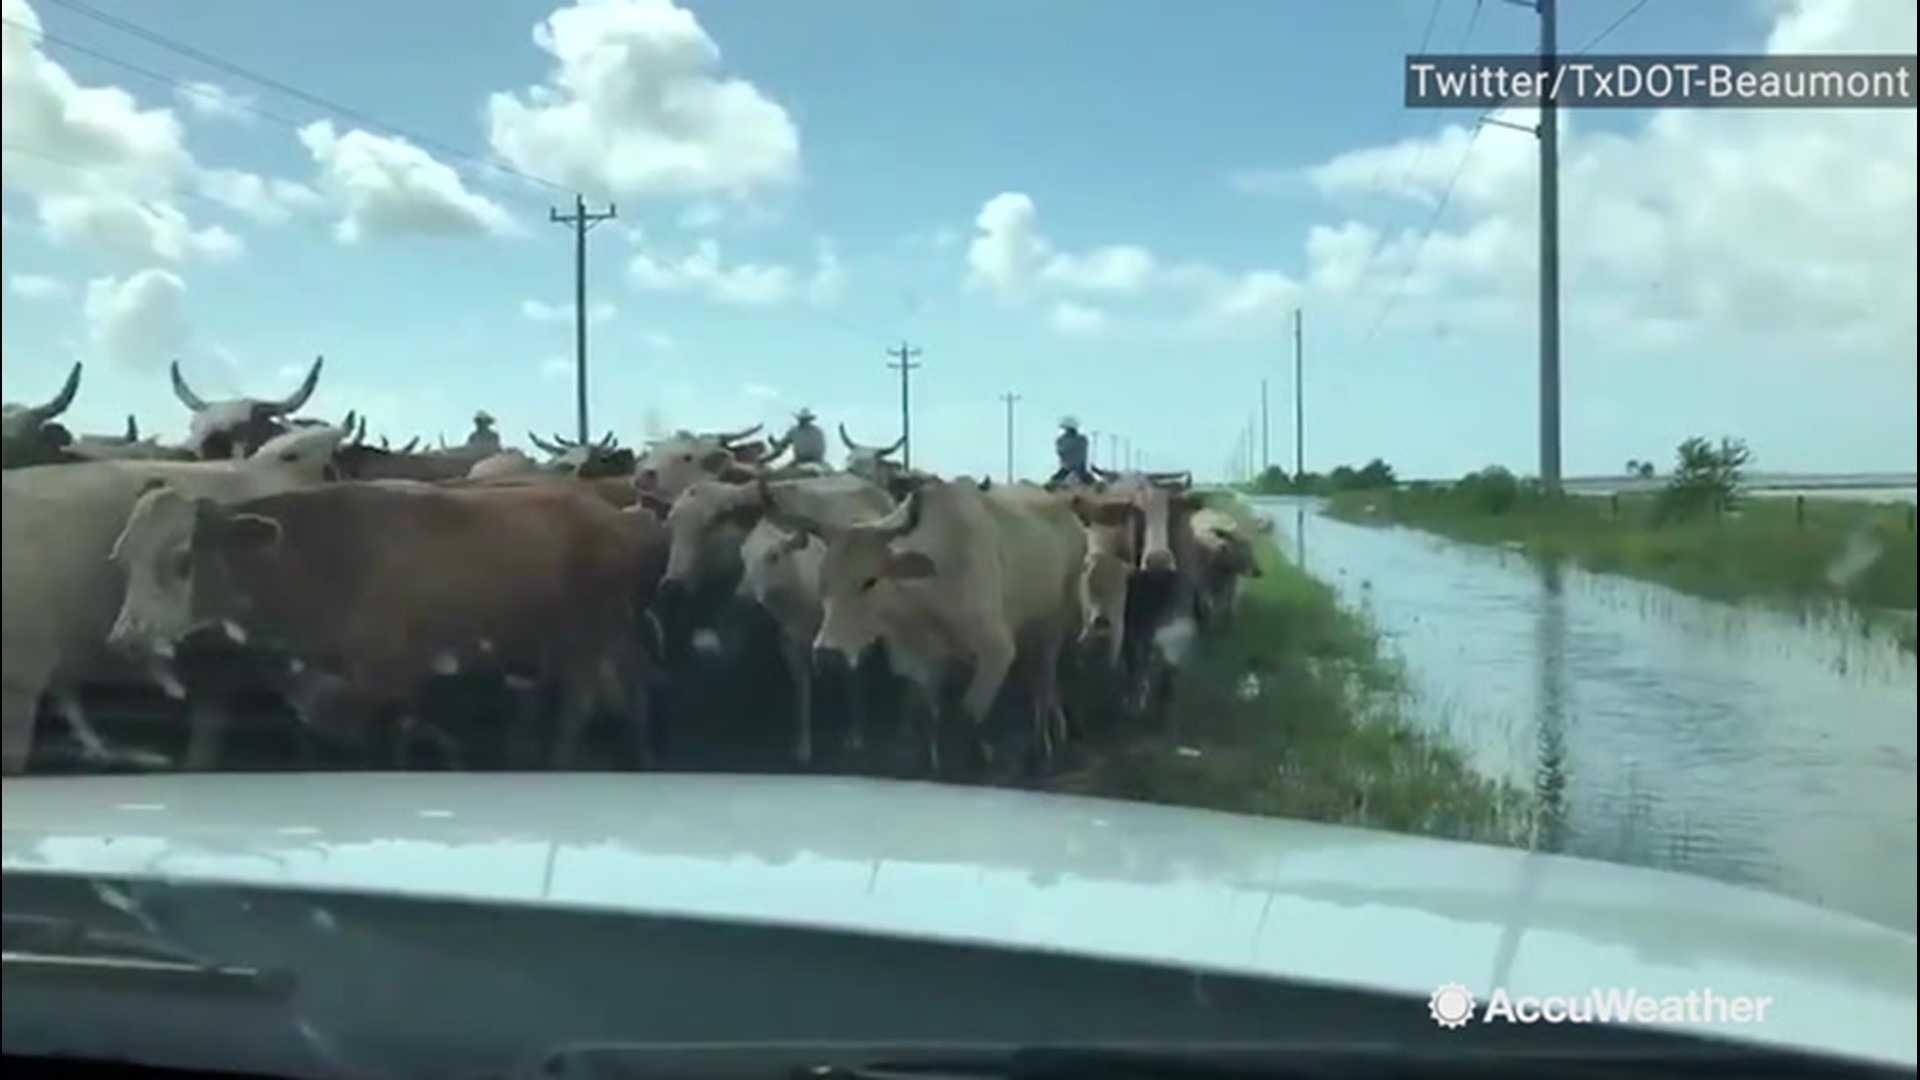 The Department of Transportation in Beaumont, Texas, has cautioned people on Sept. 23 that livestock have been searching for higher ground along roadways because of the devastating flooding that Imelda brought.